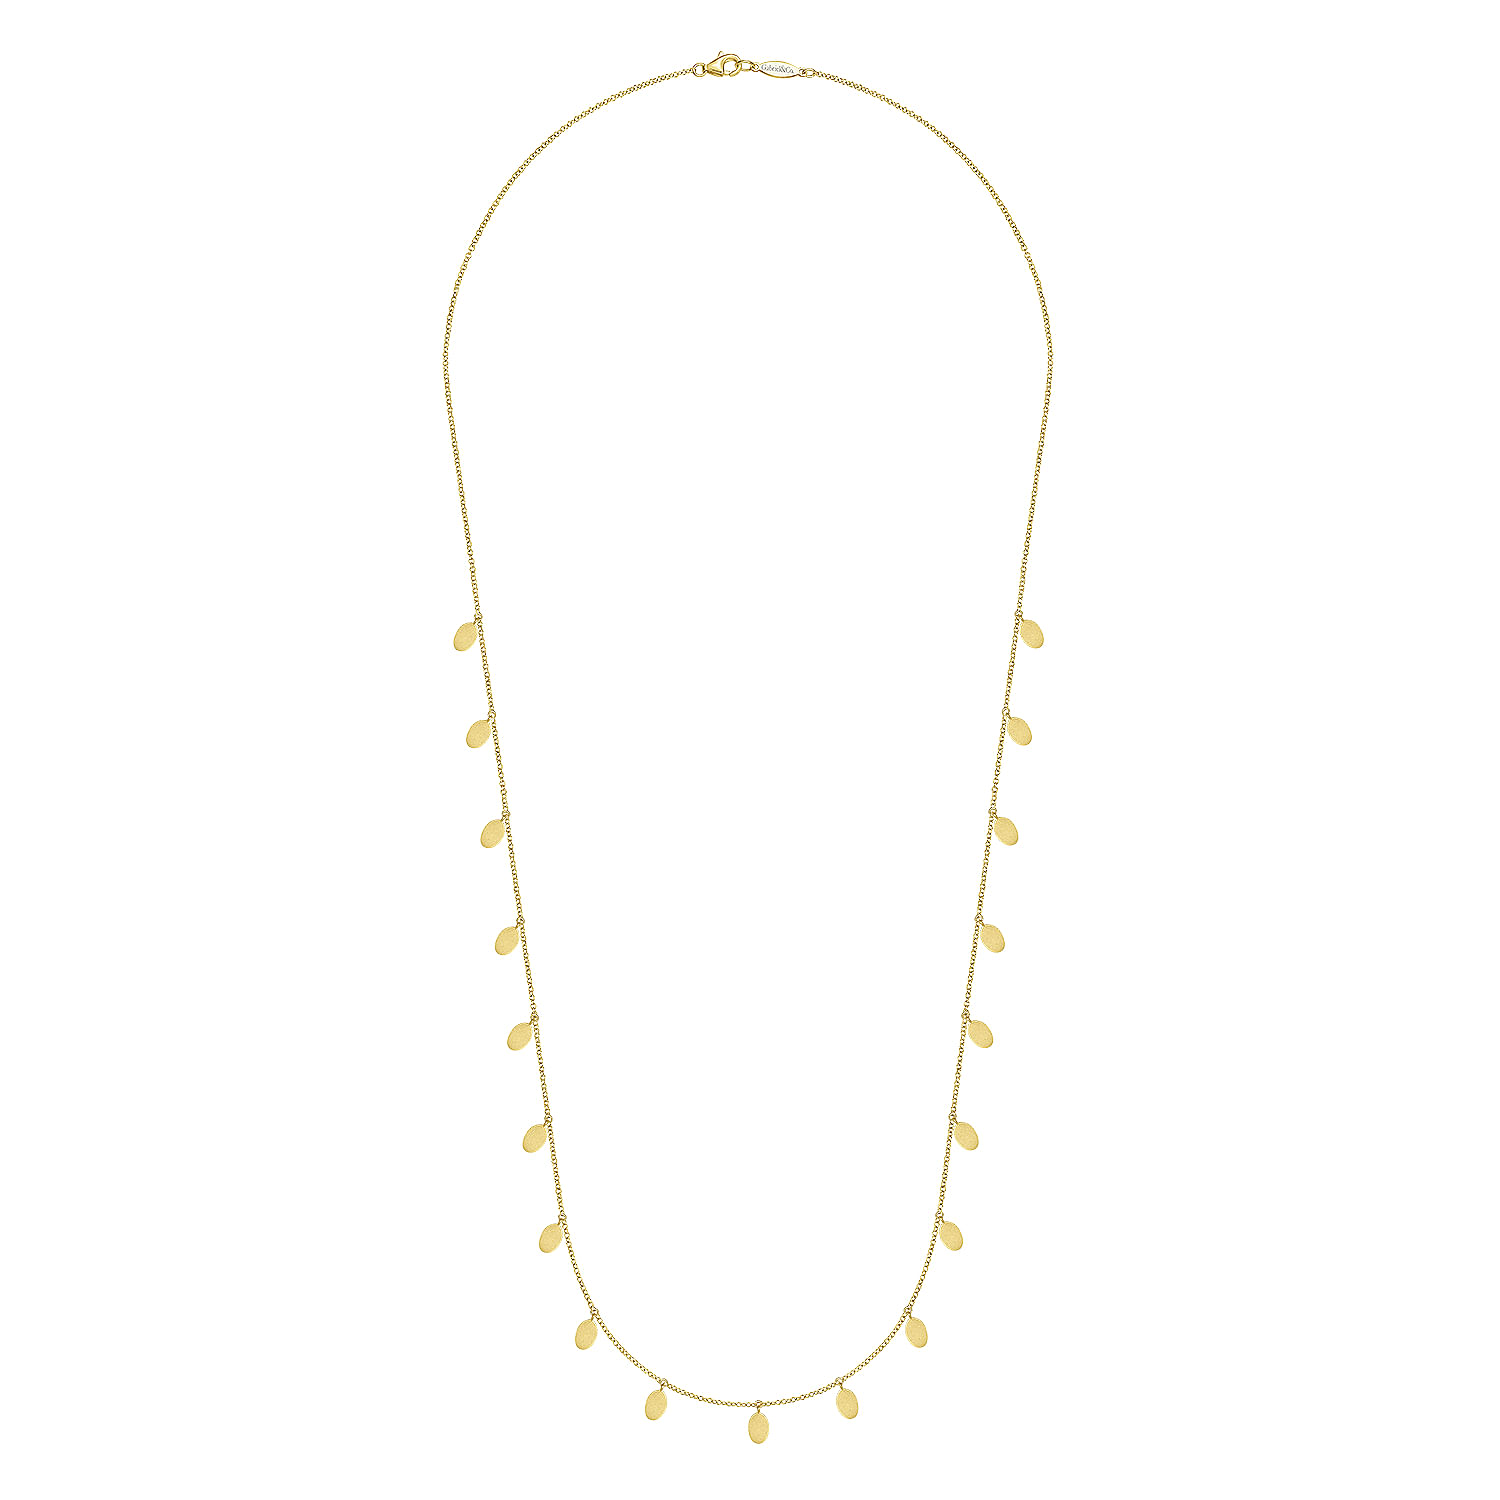 24 inch 14K Yellow Gold Necklace with Oval Shape Drops